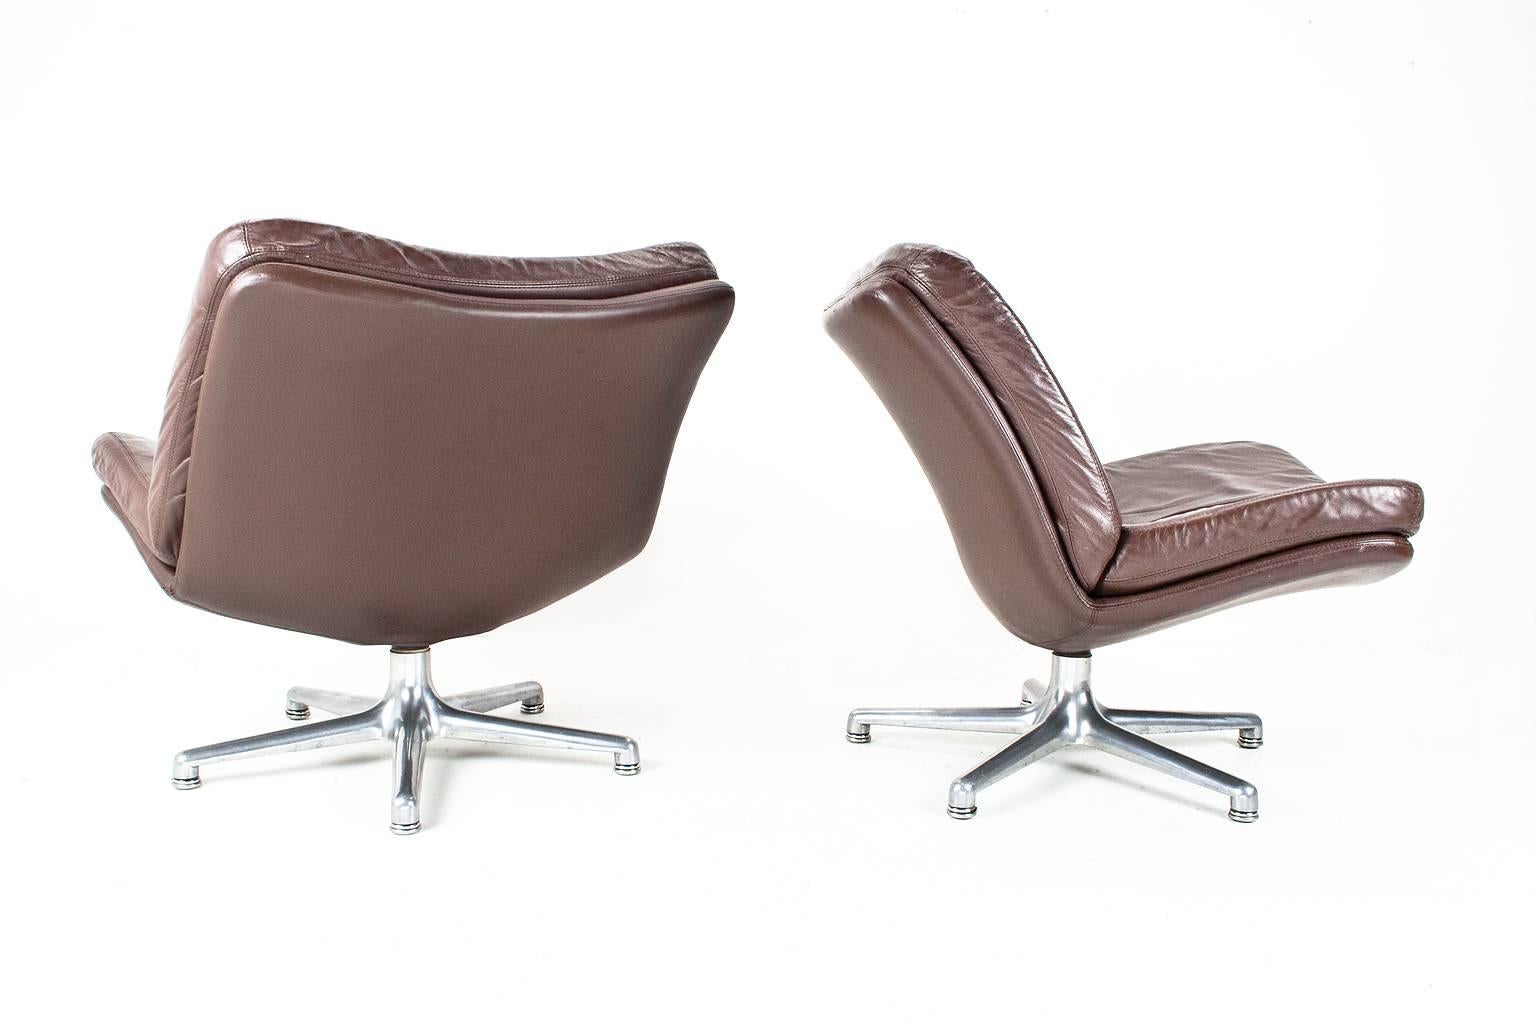 Dutch 1960s Rare Mid-Century Modern Leather Swivel Lounge Chairs by Geoffrey Harcourt